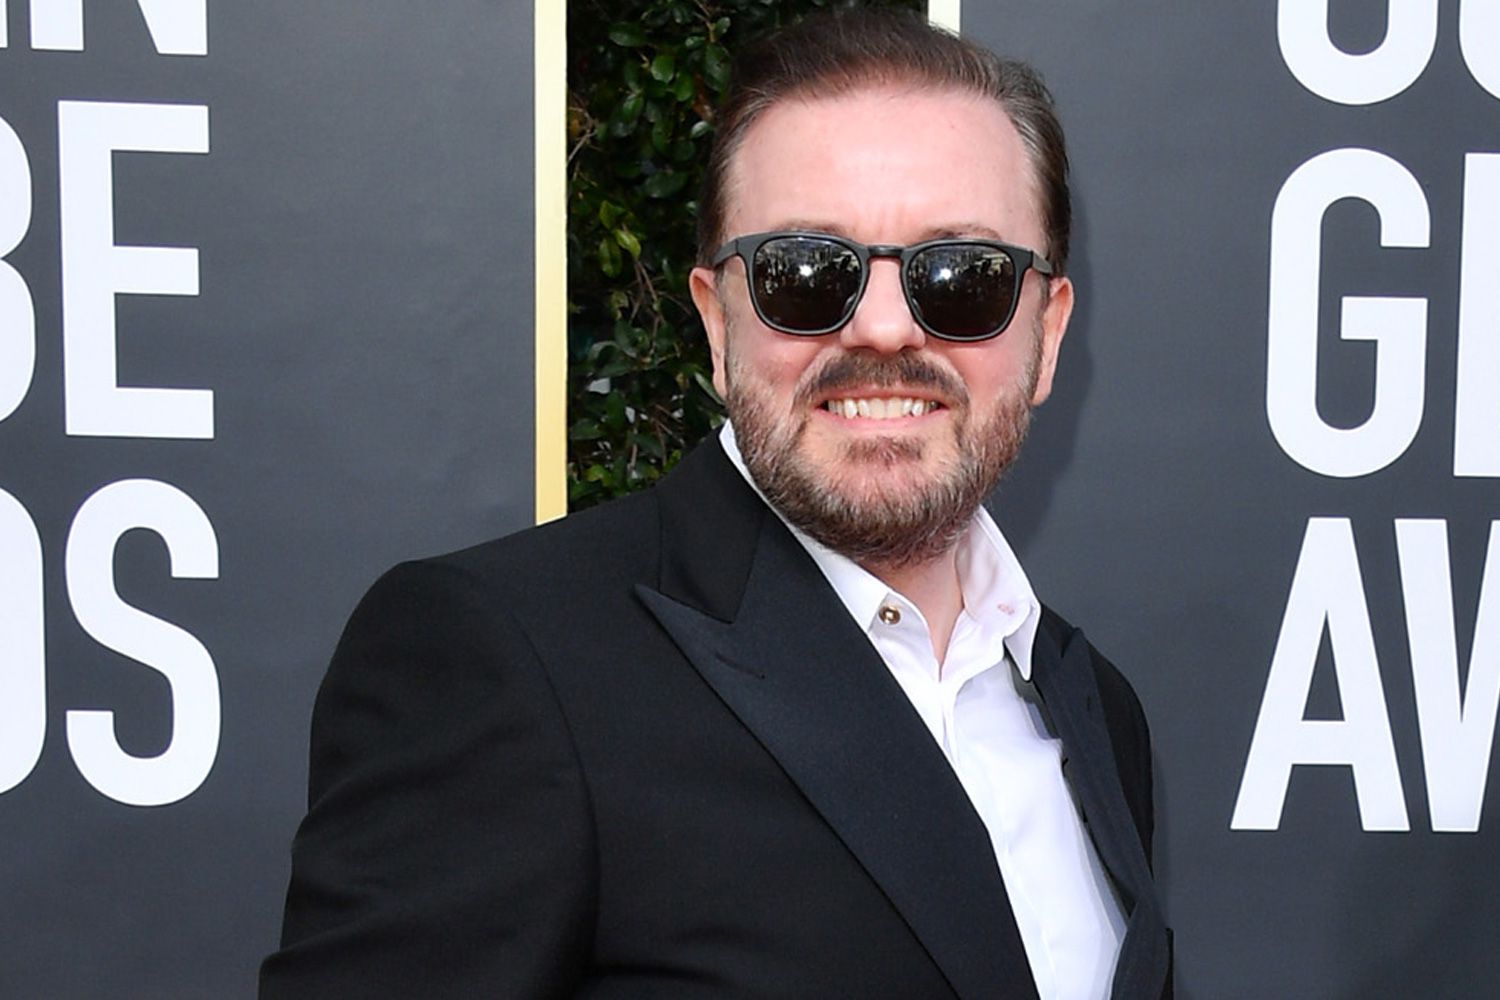 Former Golden Globes Host Ricky Gervais Absent To Accept Shows First Stand Up Award 3178